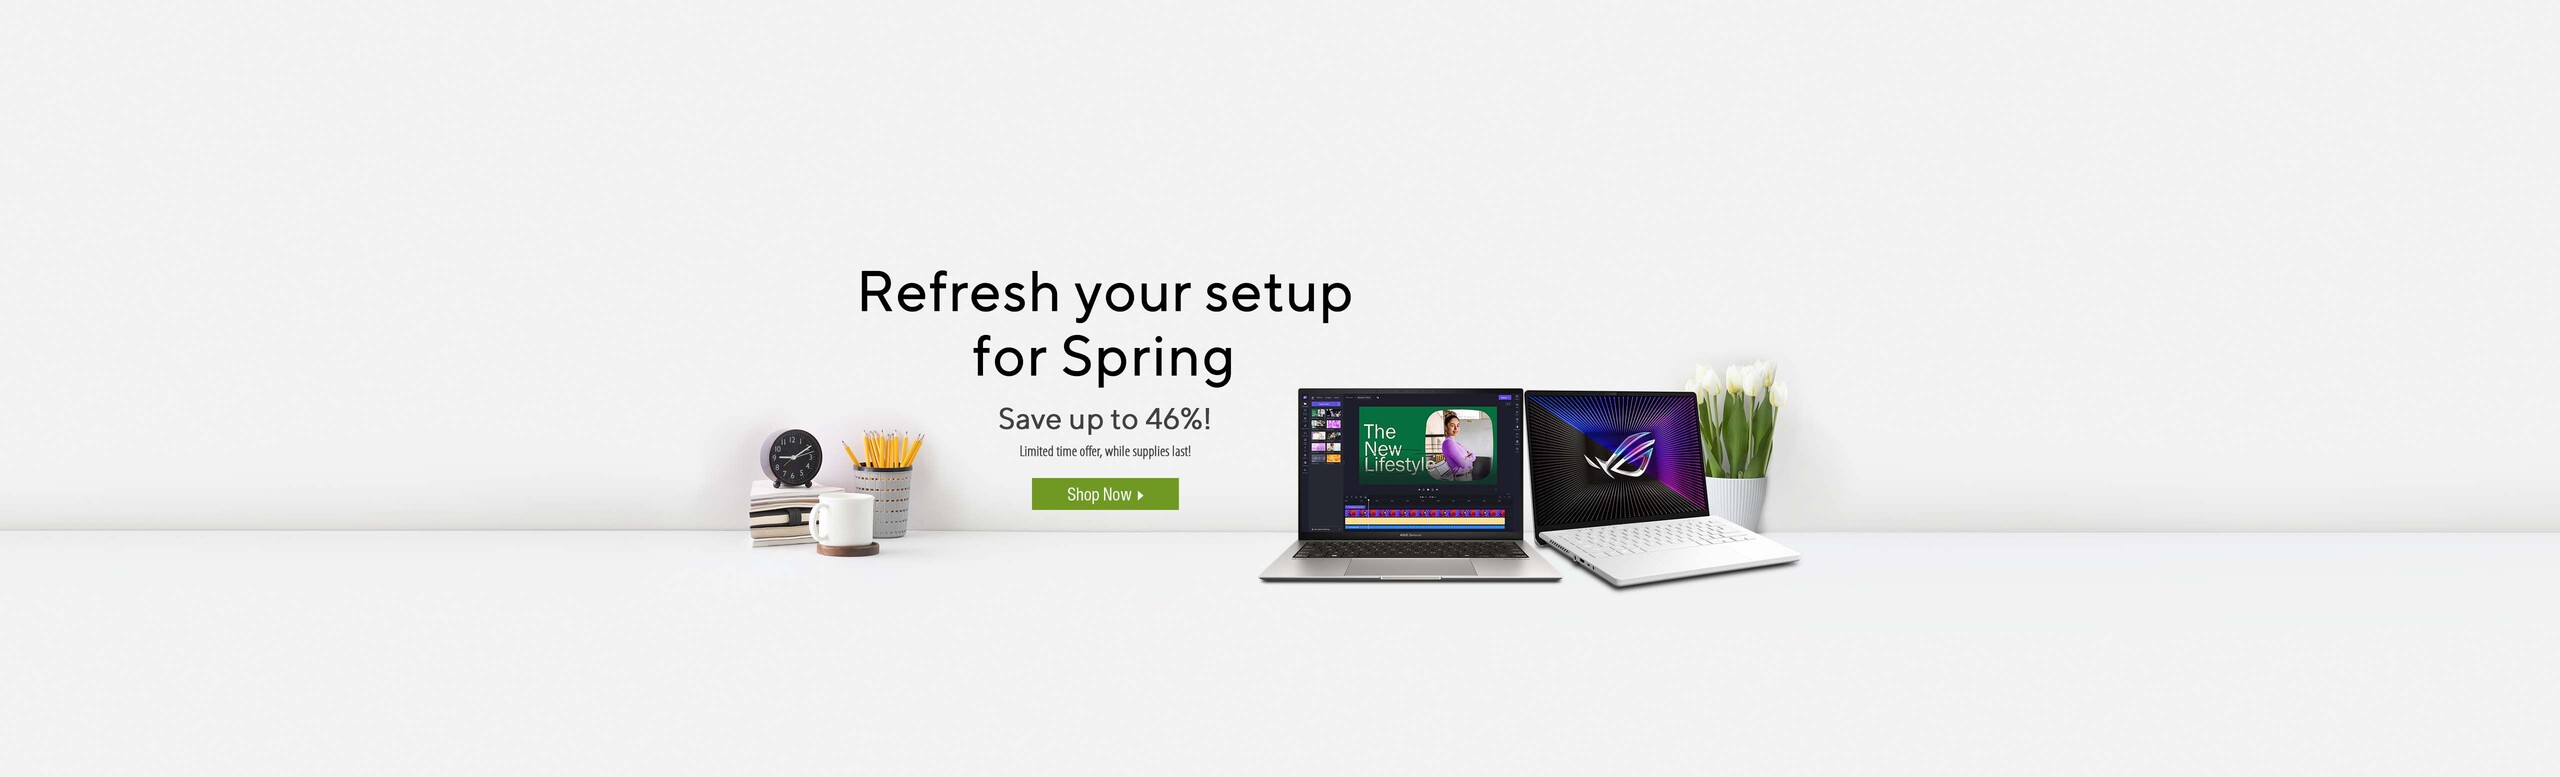 Refresh your set-up.  Save up to 46%!  Limited time offer, while supplies last!